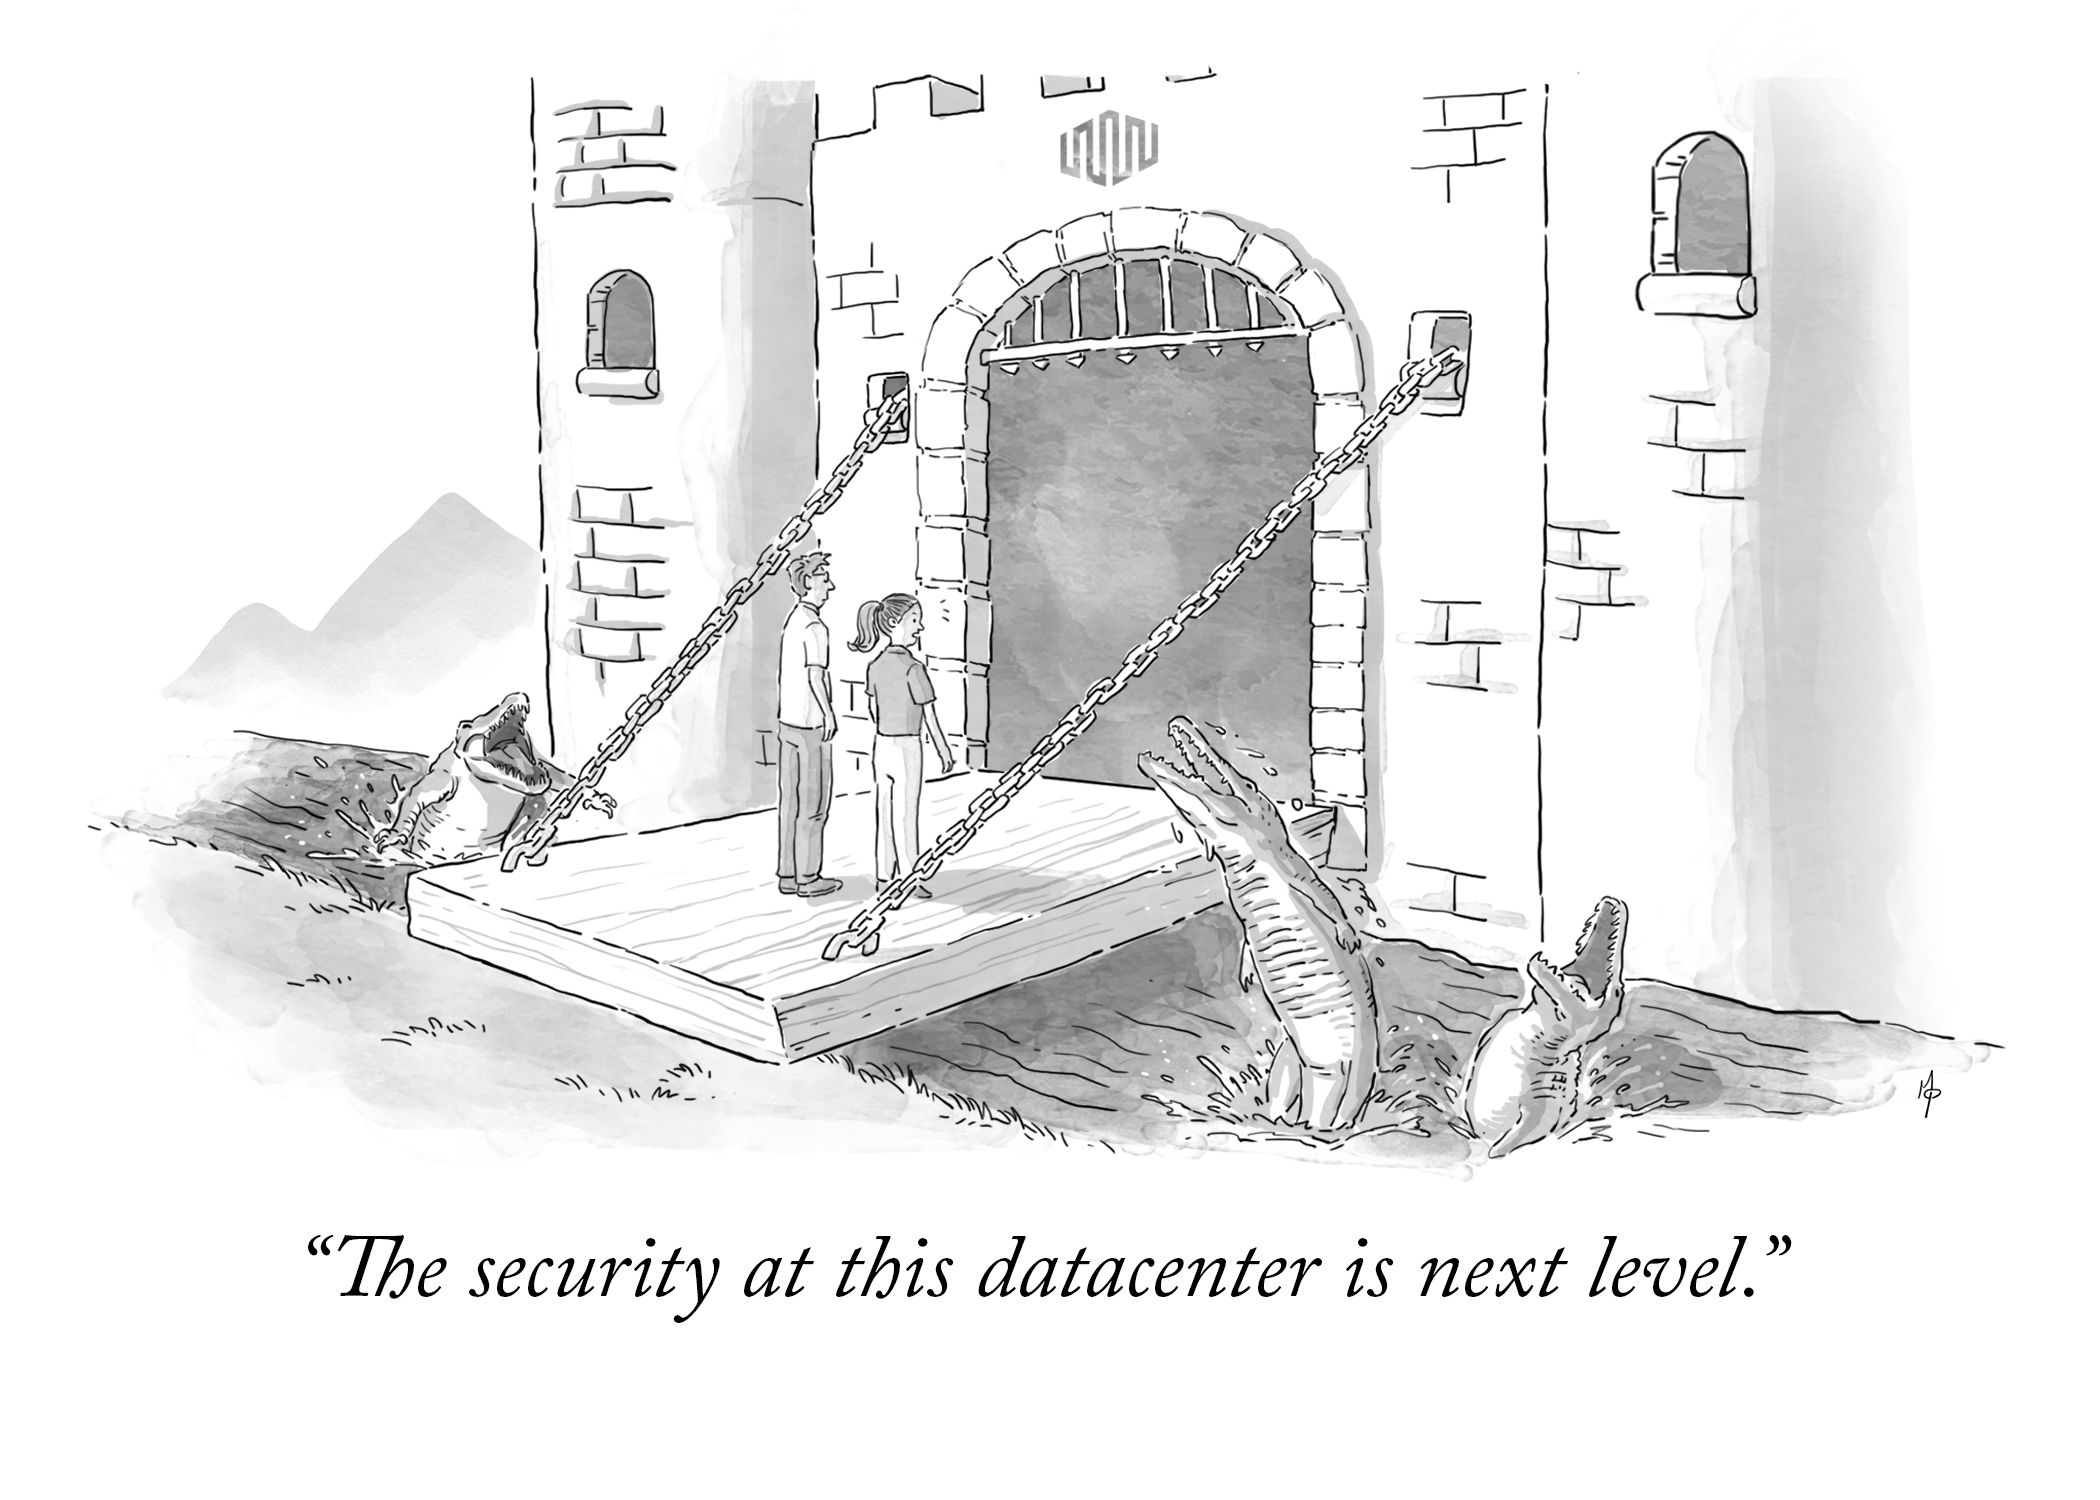 New Yorker style illustration. Two people are entering a castle via drawbridge. There is a crocodile rising from the moat. The caption reads: The security at this data center is next level.